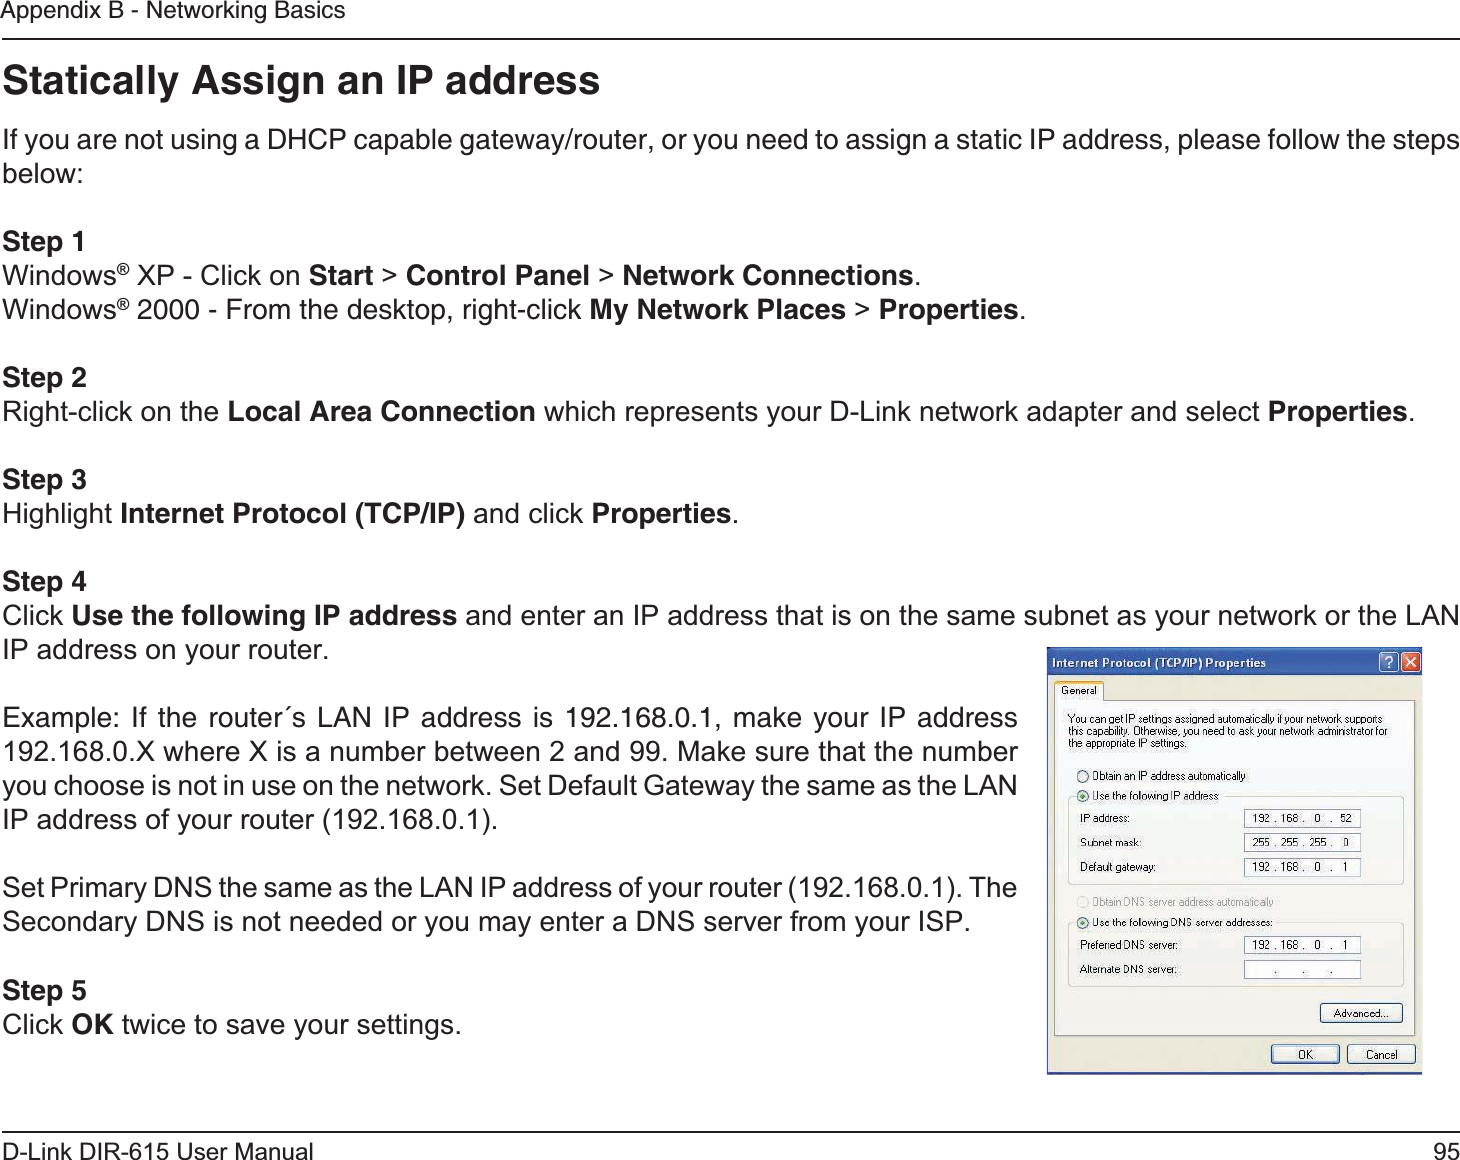 95D-Link DIR-615 User ManualAppendix B - Networking BasicsStatically Assign an IP addressIf you are not using a DHCP capable gateway/router, or you need to assign a static IP address, please follow the steps below:Step 1Windows® XP - Click on Start &gt; Control Panel &gt; Network Connections.Windows® 2000 - From the desktop, right-click My Network Places &gt; Properties.Step 2Right-click on the Local Area Connection which represents your D-Link network adapter and select Properties.Step 3Highlight Internet Protocol (TCP/IP) and click Properties.Step 4Click Use the following IP address and enter an IP address that is on the same subnet as your network or the LAN IP address on your router. Example: If the router´s LAN IP address is 192.168.0.1, make your IP address 192.168.0.X where X is a number between 2 and 99. Make sure that the number you choose is not in use on the network. Set Default Gateway the same as the LAN IP address of your router (192.168.0.1). Set Primary DNS the same as the LAN IP address of your router (192.168.0.1). The Secondary DNS is not needed or you may enter a DNS server from your ISP.Step 5Click OK twice to save your settings.